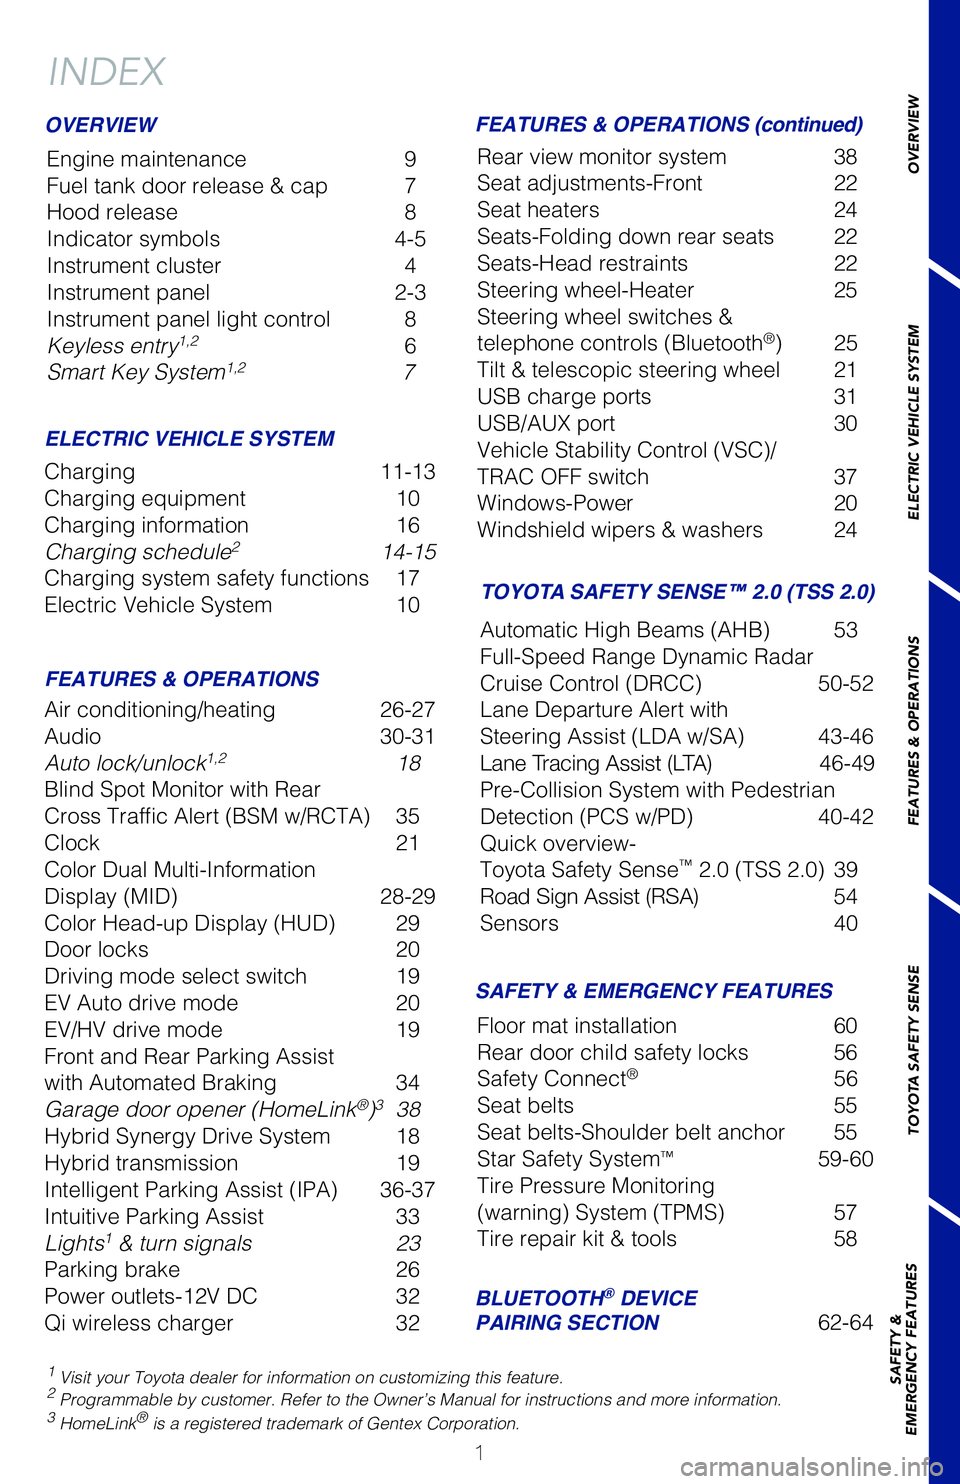 TOYOTA PRIUS PRIME 2021  Owners Manual (in English) 1
OVERVIEW ELECTRIC VEHICLE SYSTEM FEATURES & OPERATIONS TOYOTA SAFETY SENSE SAFETY &  
EMERGENCY FEATURES
INDEX
�&�O�H�J�O�F��N�B�J�O�U�F�O�B�O�D�F� �
��V�F�M��U�B�O�L��E�P�P�S��S�F�M�F�B�T�F�